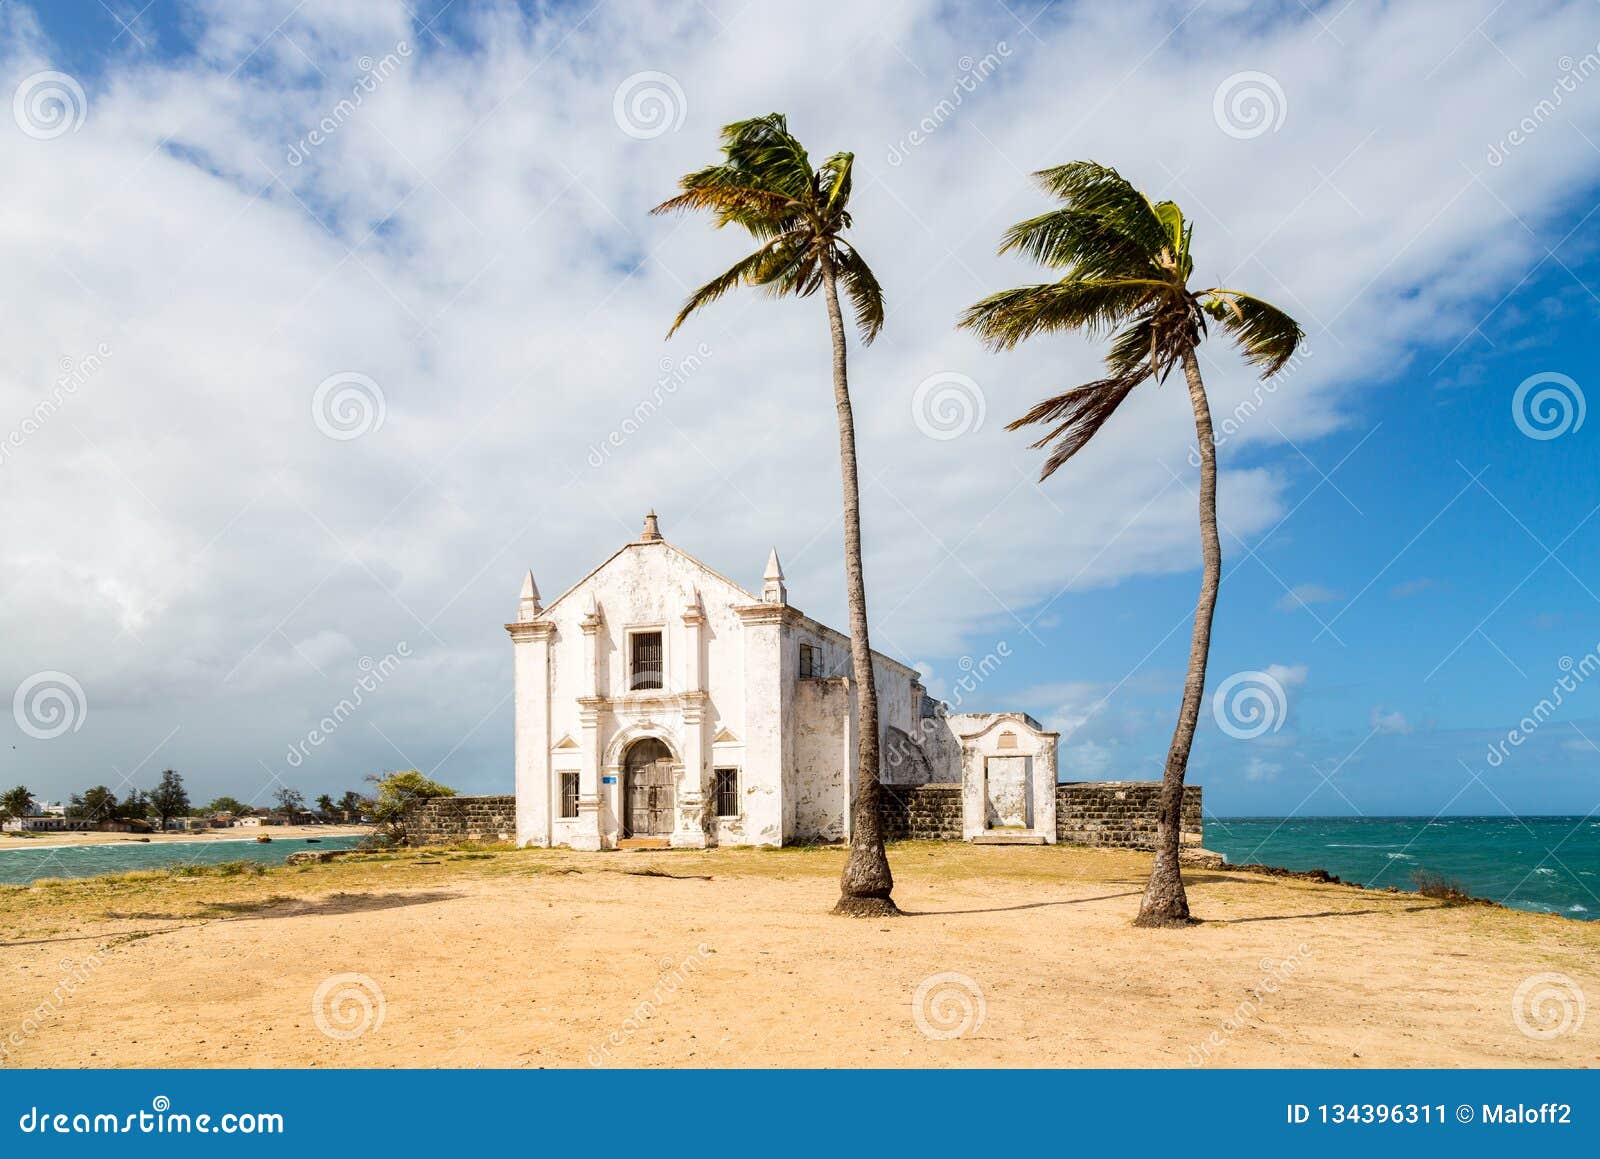 church and fortress of san antonio on mozambique island, with two palm trees on sand. indian ocean coast, nampula province.